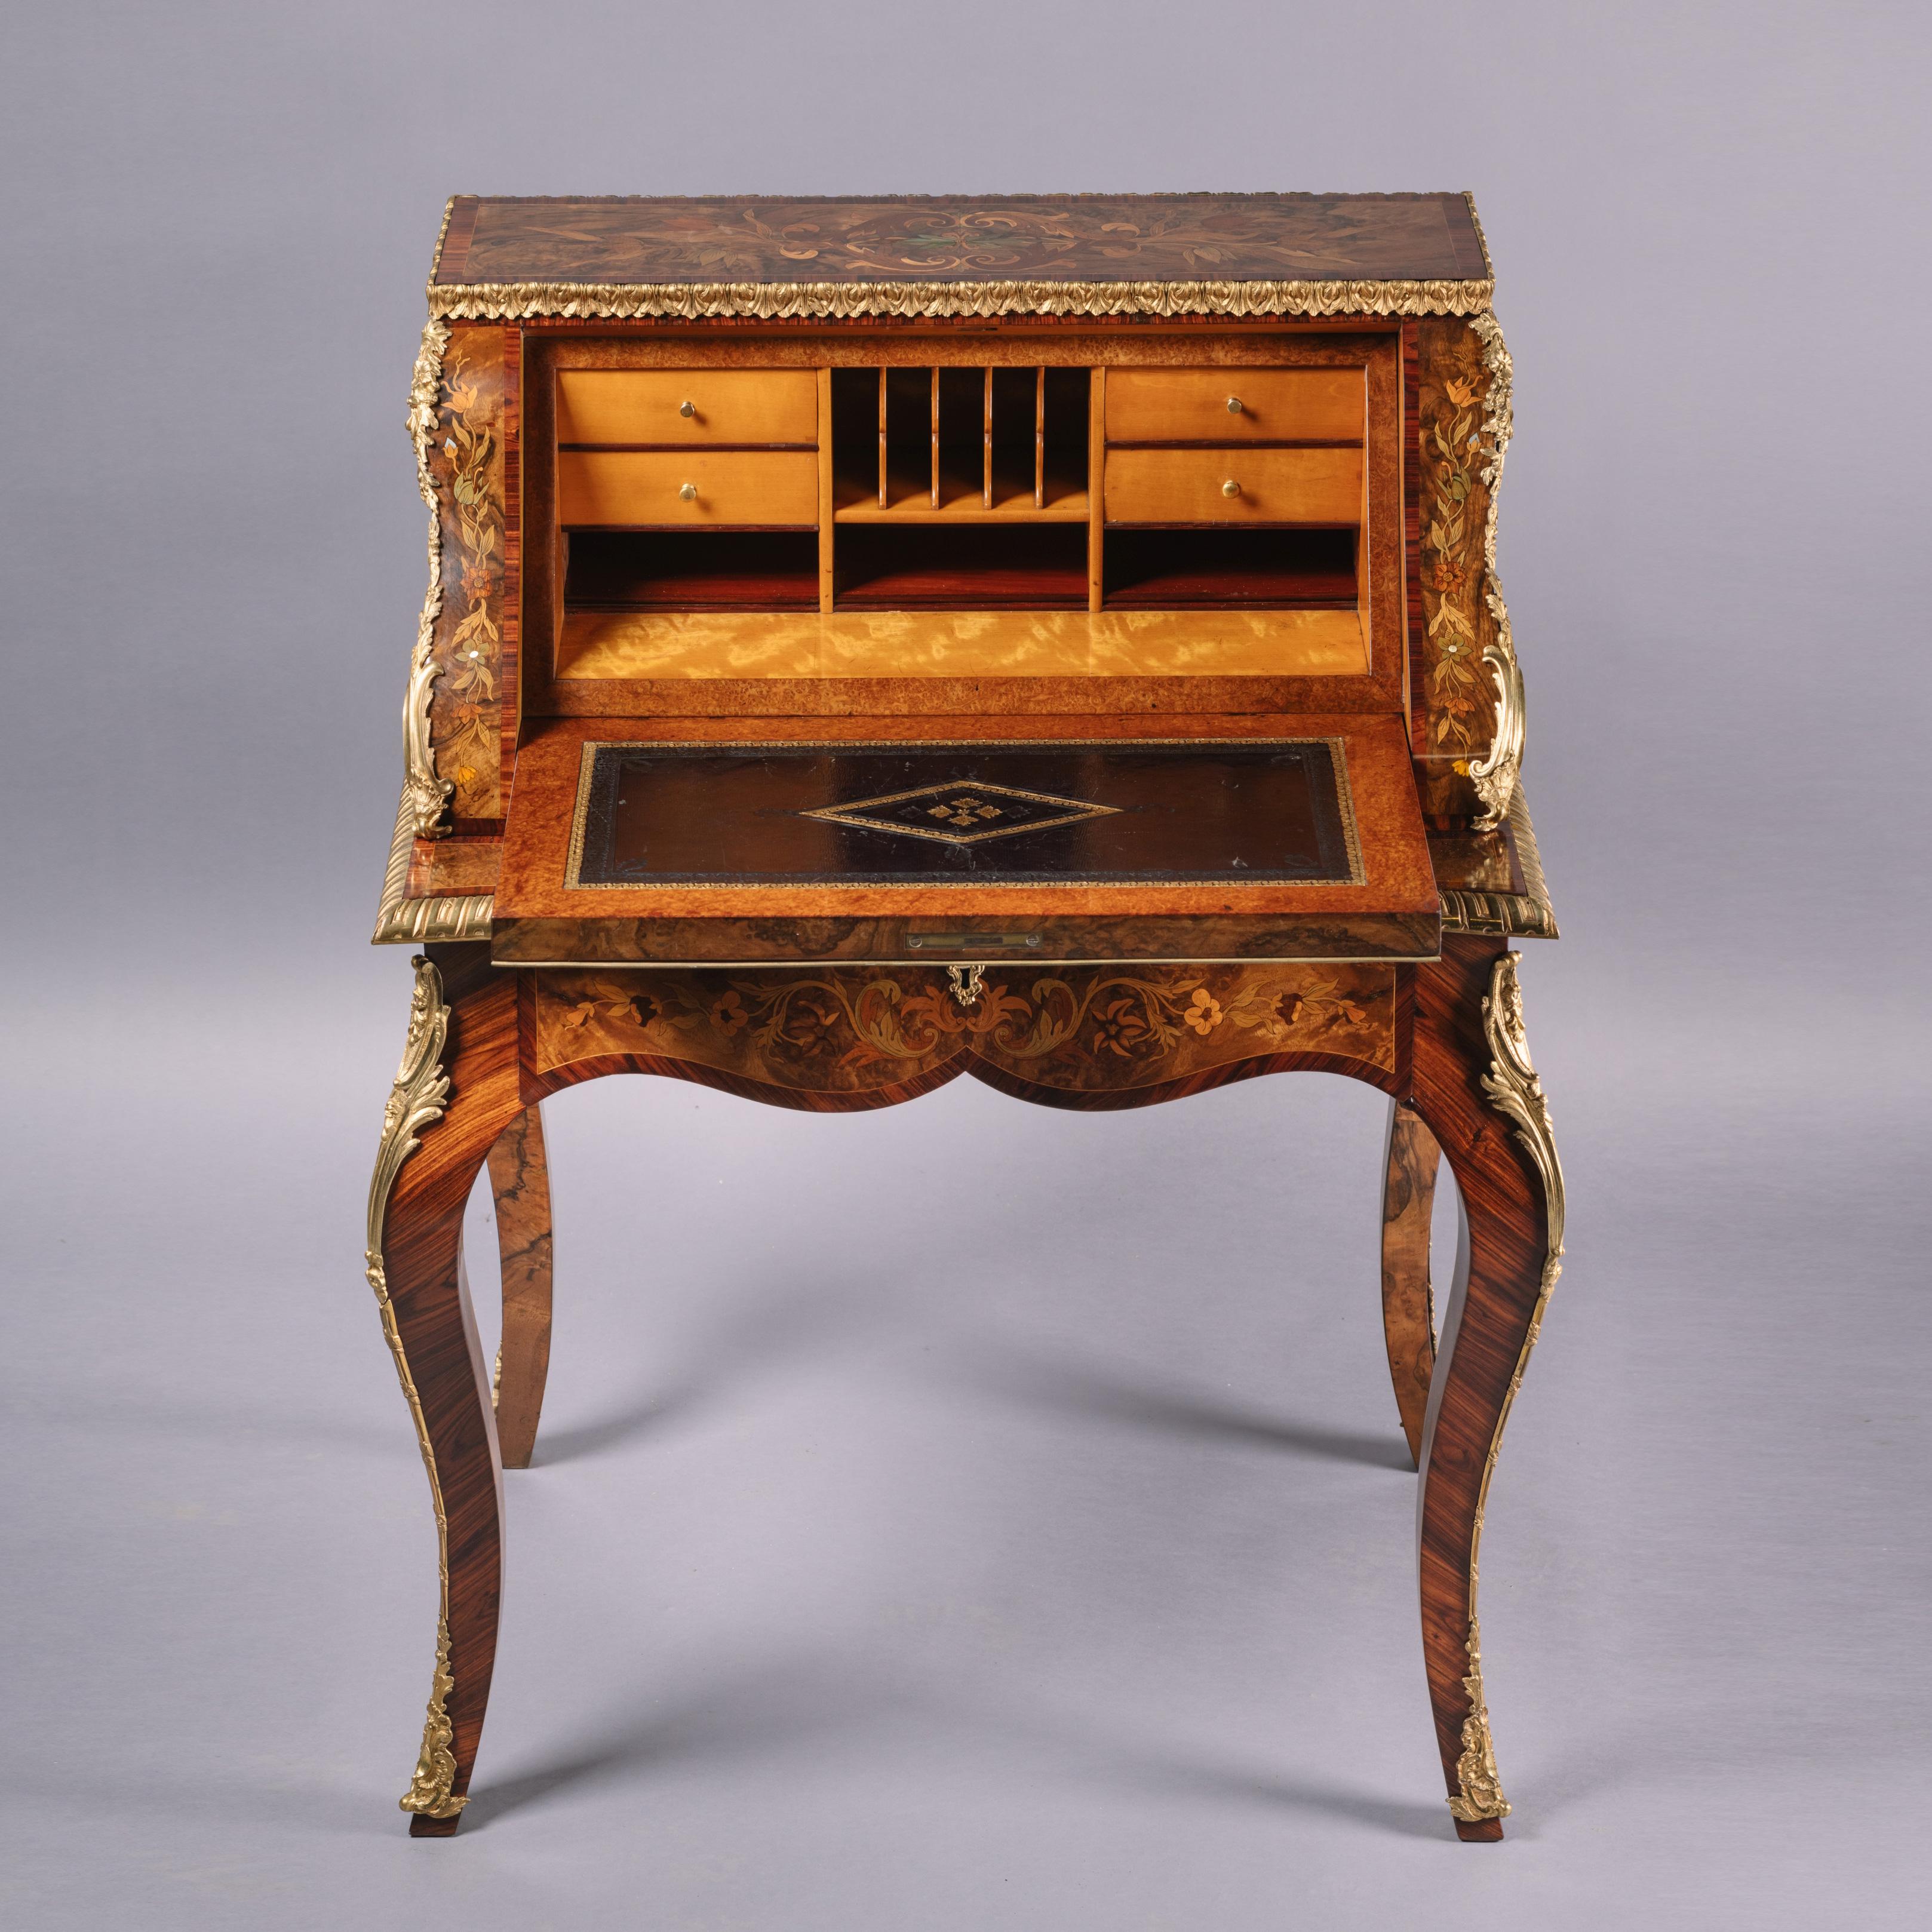 A fine Victorian gilt-bronze mounted marquetry inlaid Bureau De Dame.

This richly decorated bureau de dame is of bombe shape beautifully inlaid overall with marquetry foliate sprays, exotic birds, butterflies, shells, and foliage.

The